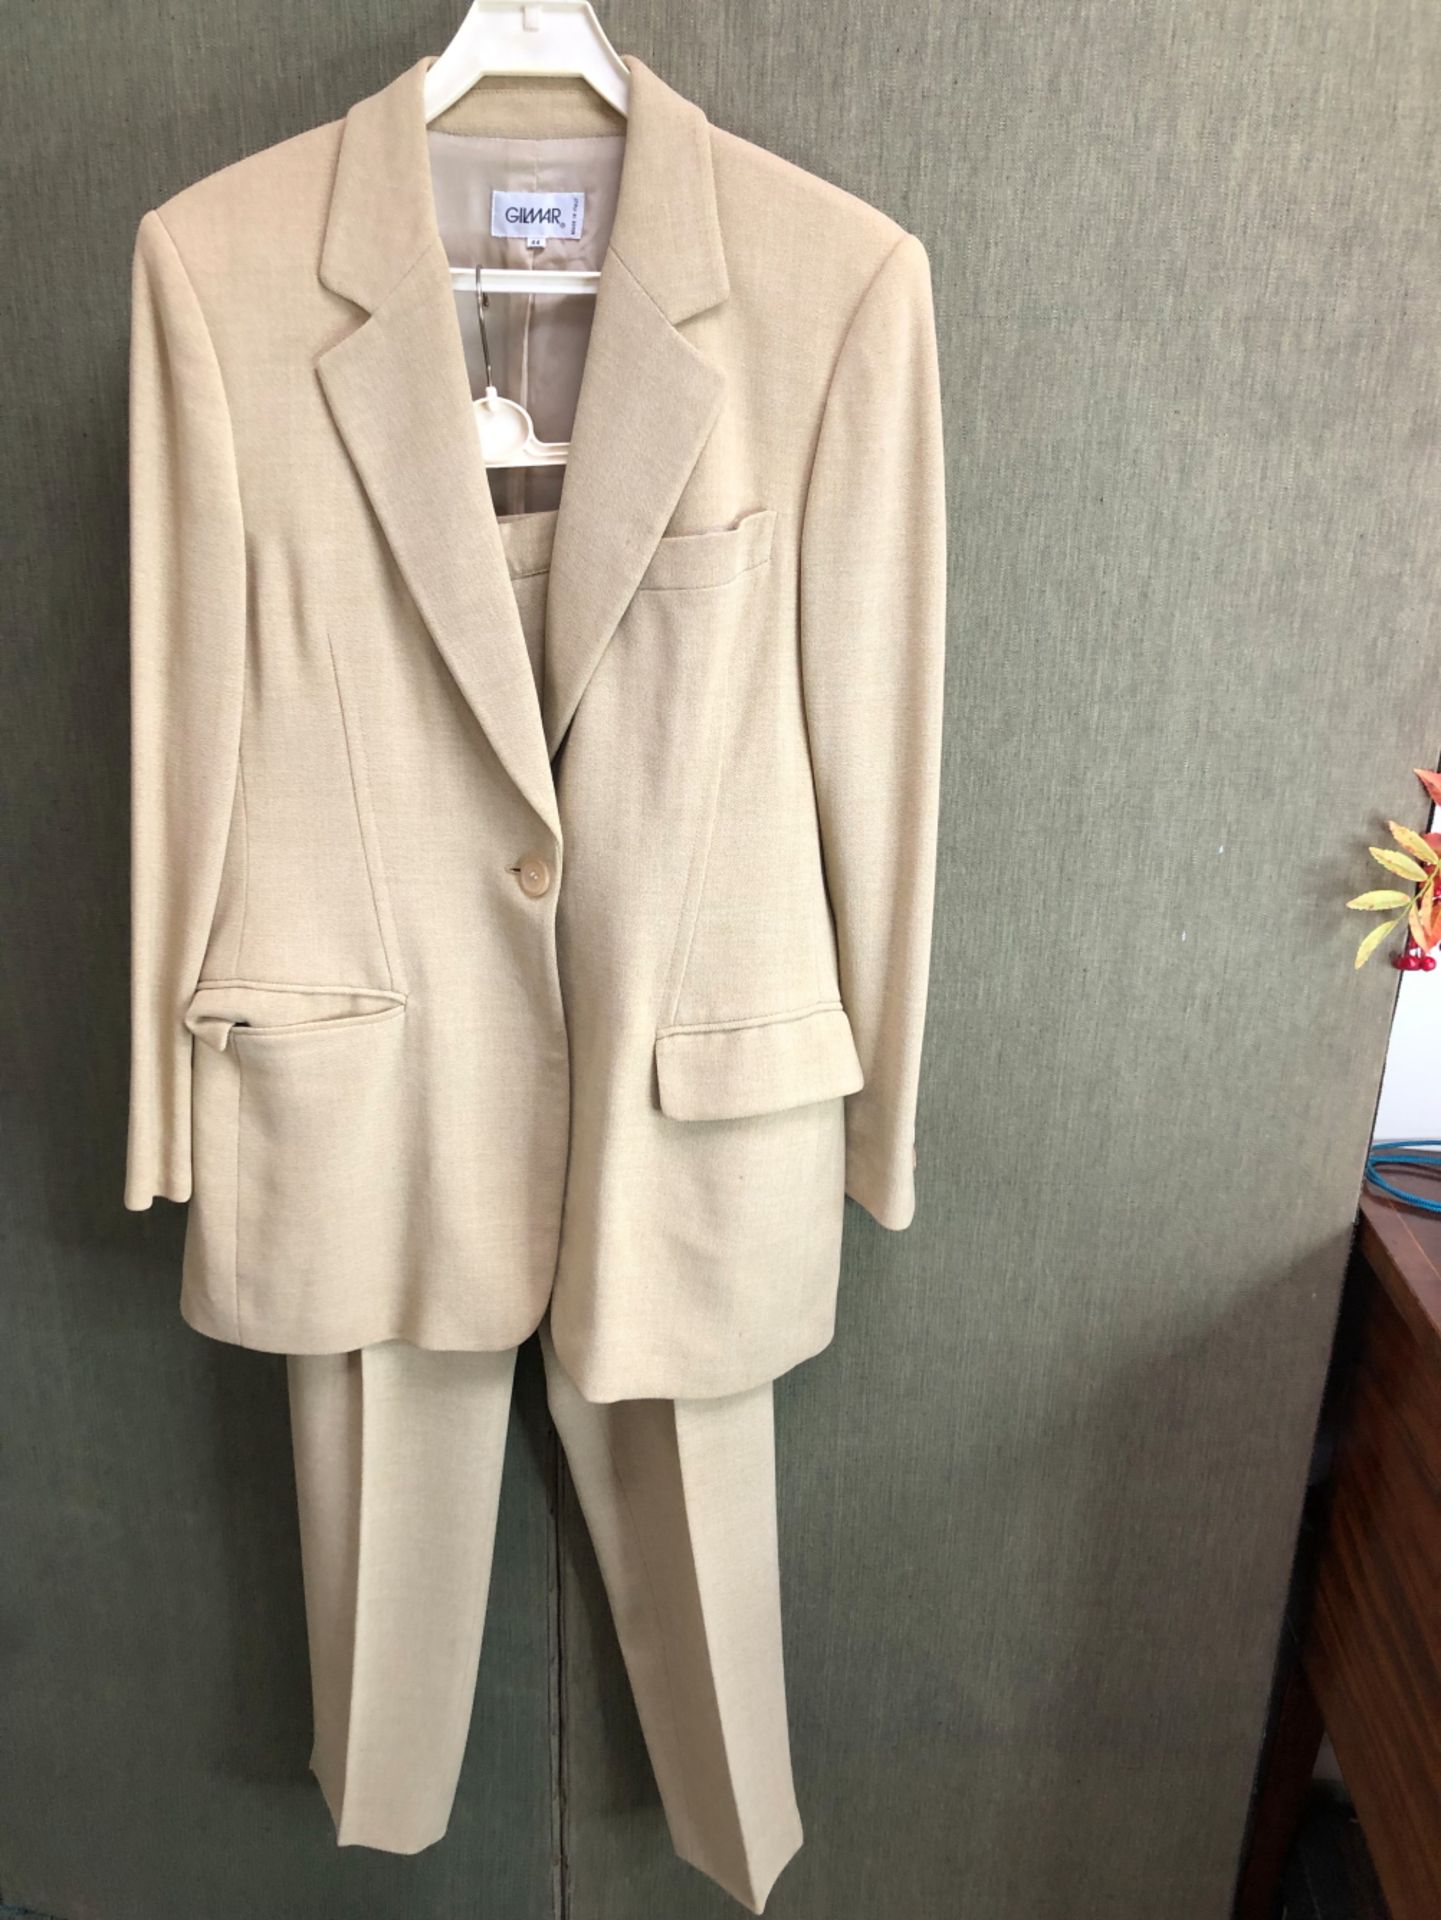 A AKRIS SWITZERLAND LADIES CREAM AND BEIGE CHECKED JACKET US SIZE 8 TOGETHER WITH A GILMAR ITALY - Image 9 of 11